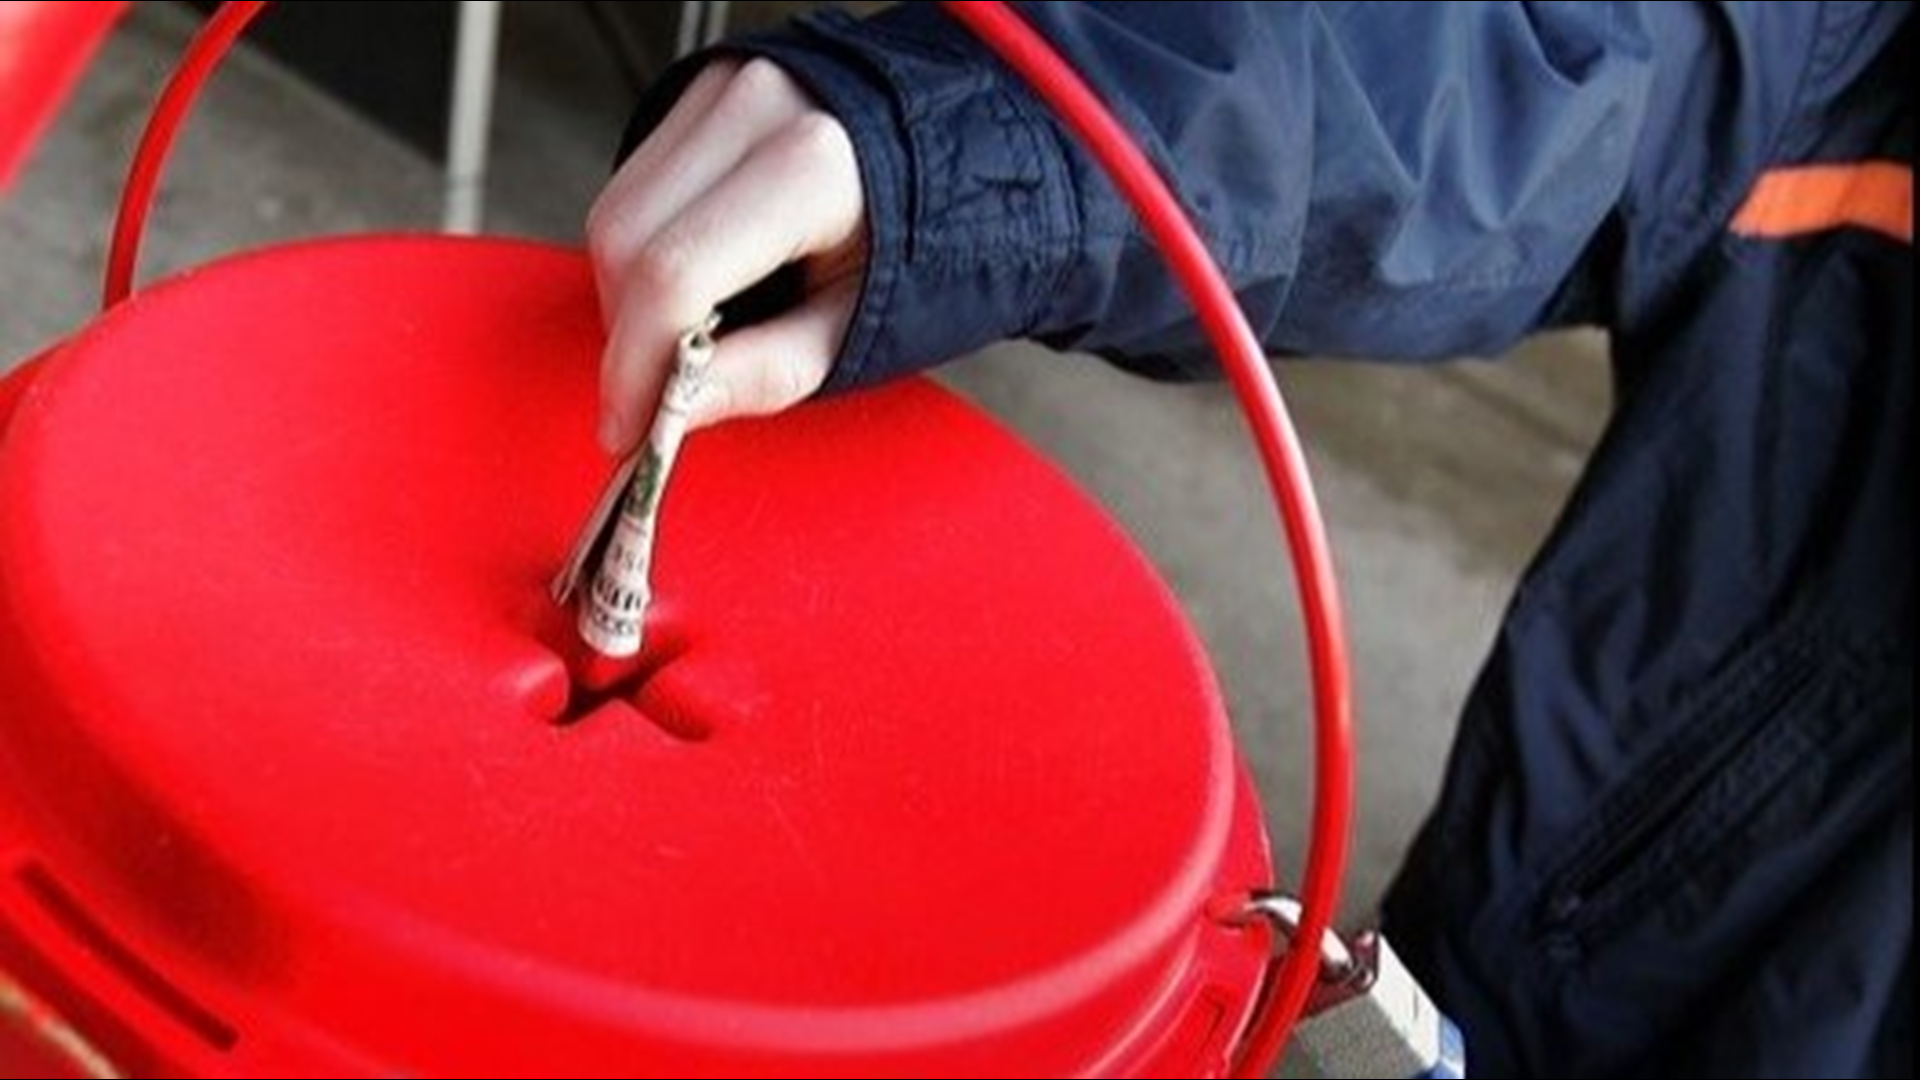 Salvation Army officials in Maine say donations are down as much as 50-percent in some spots.